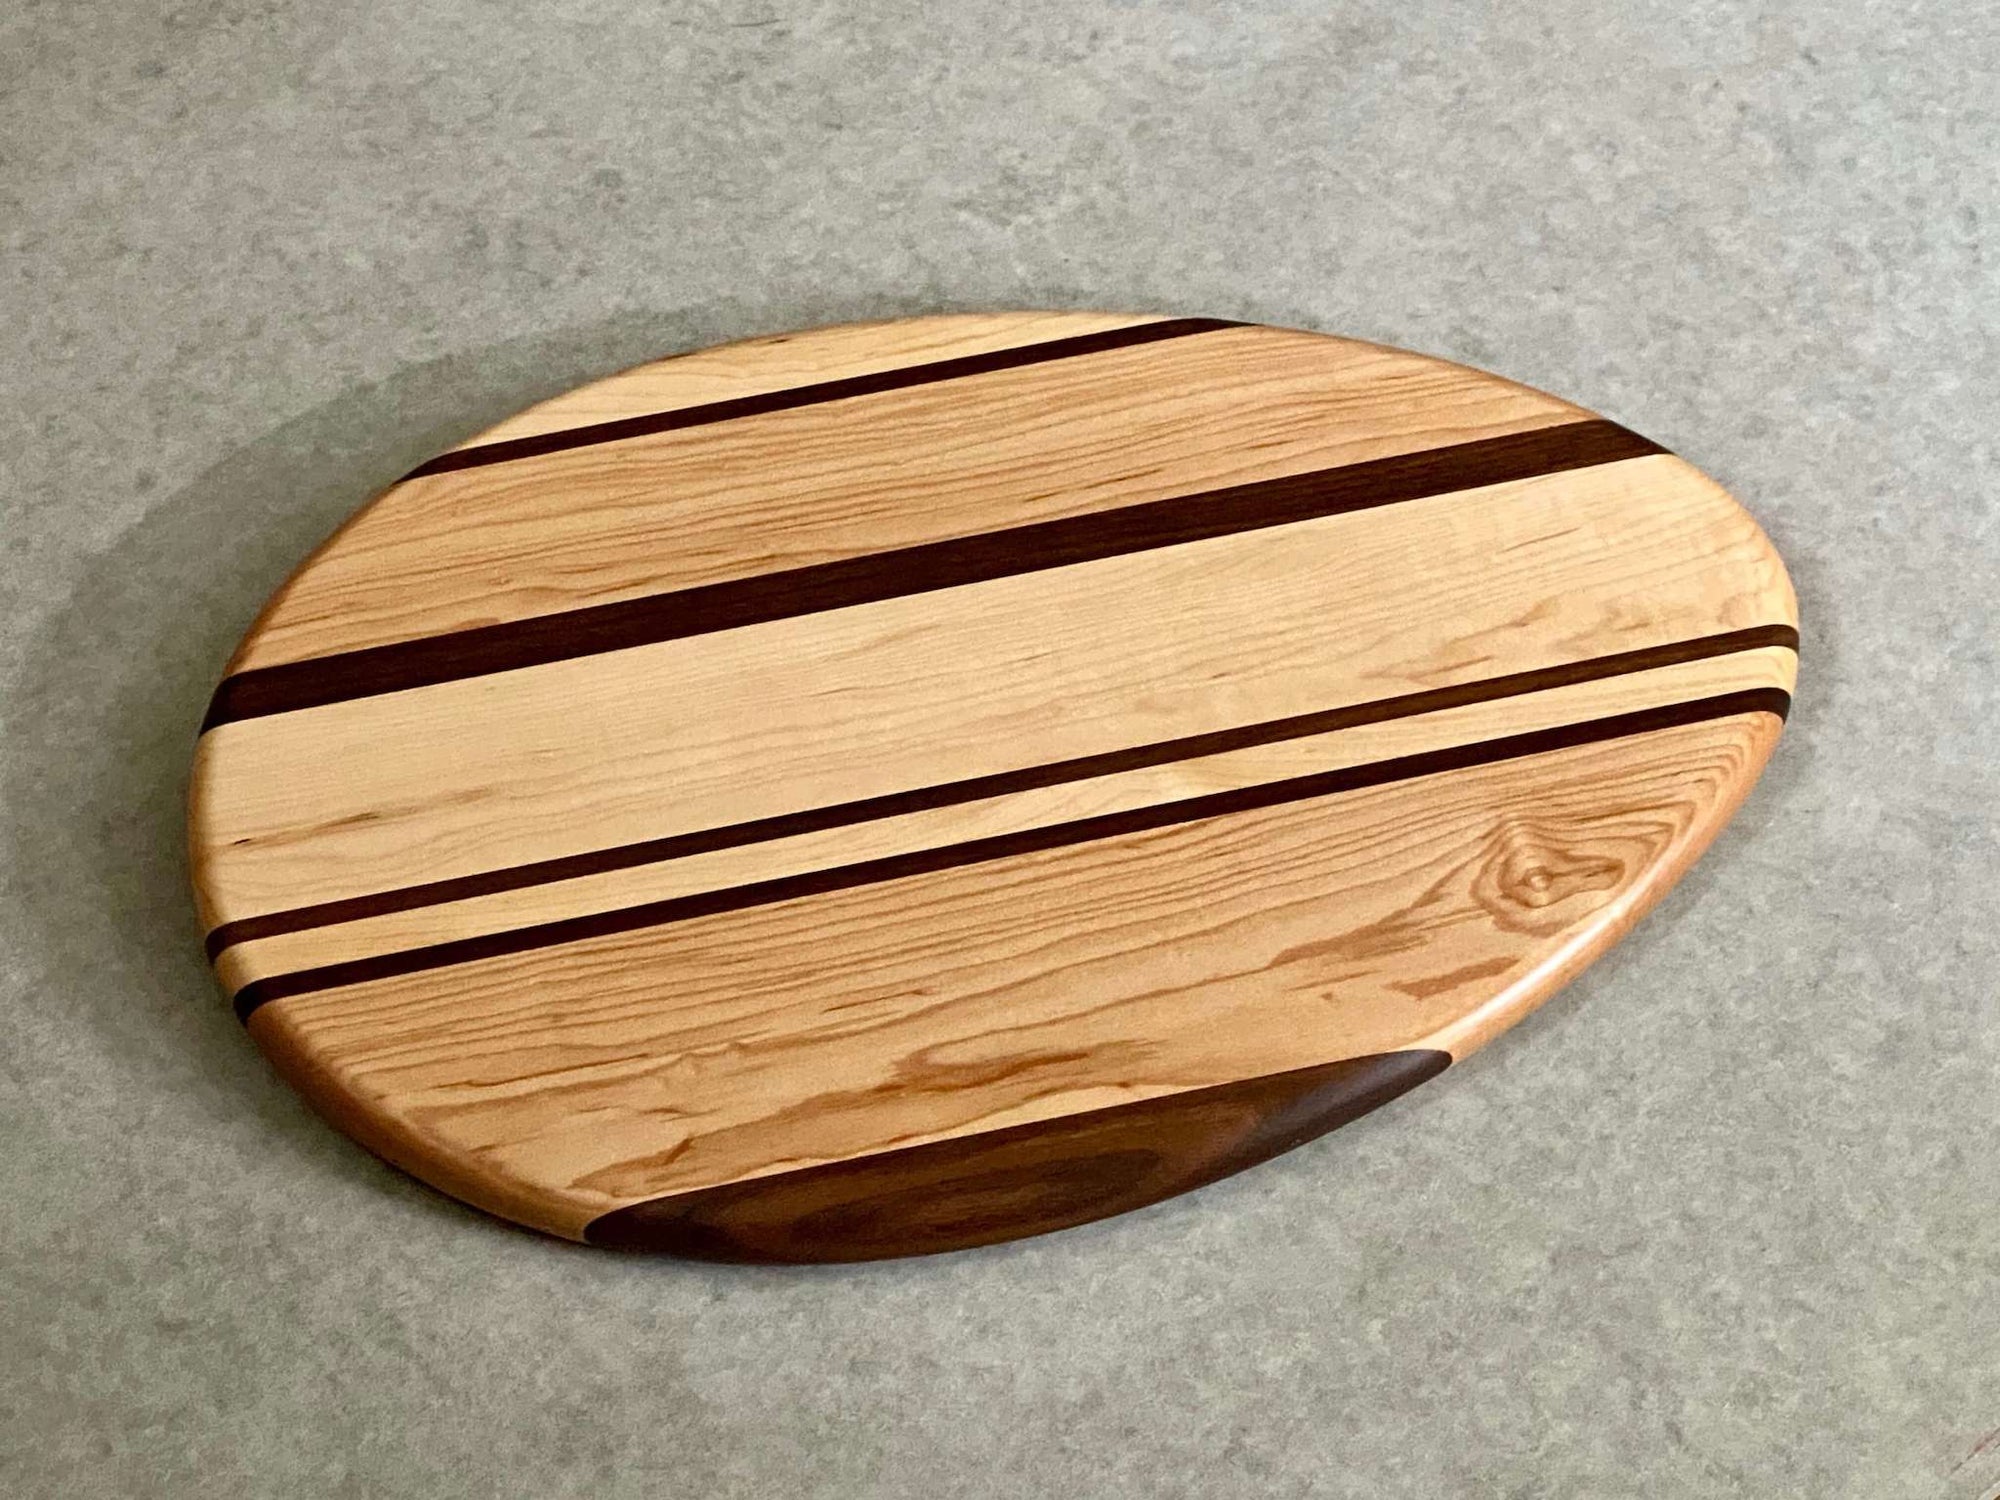 An egg shaped cutting and serving board with bold stripes of mahogany and walnut.